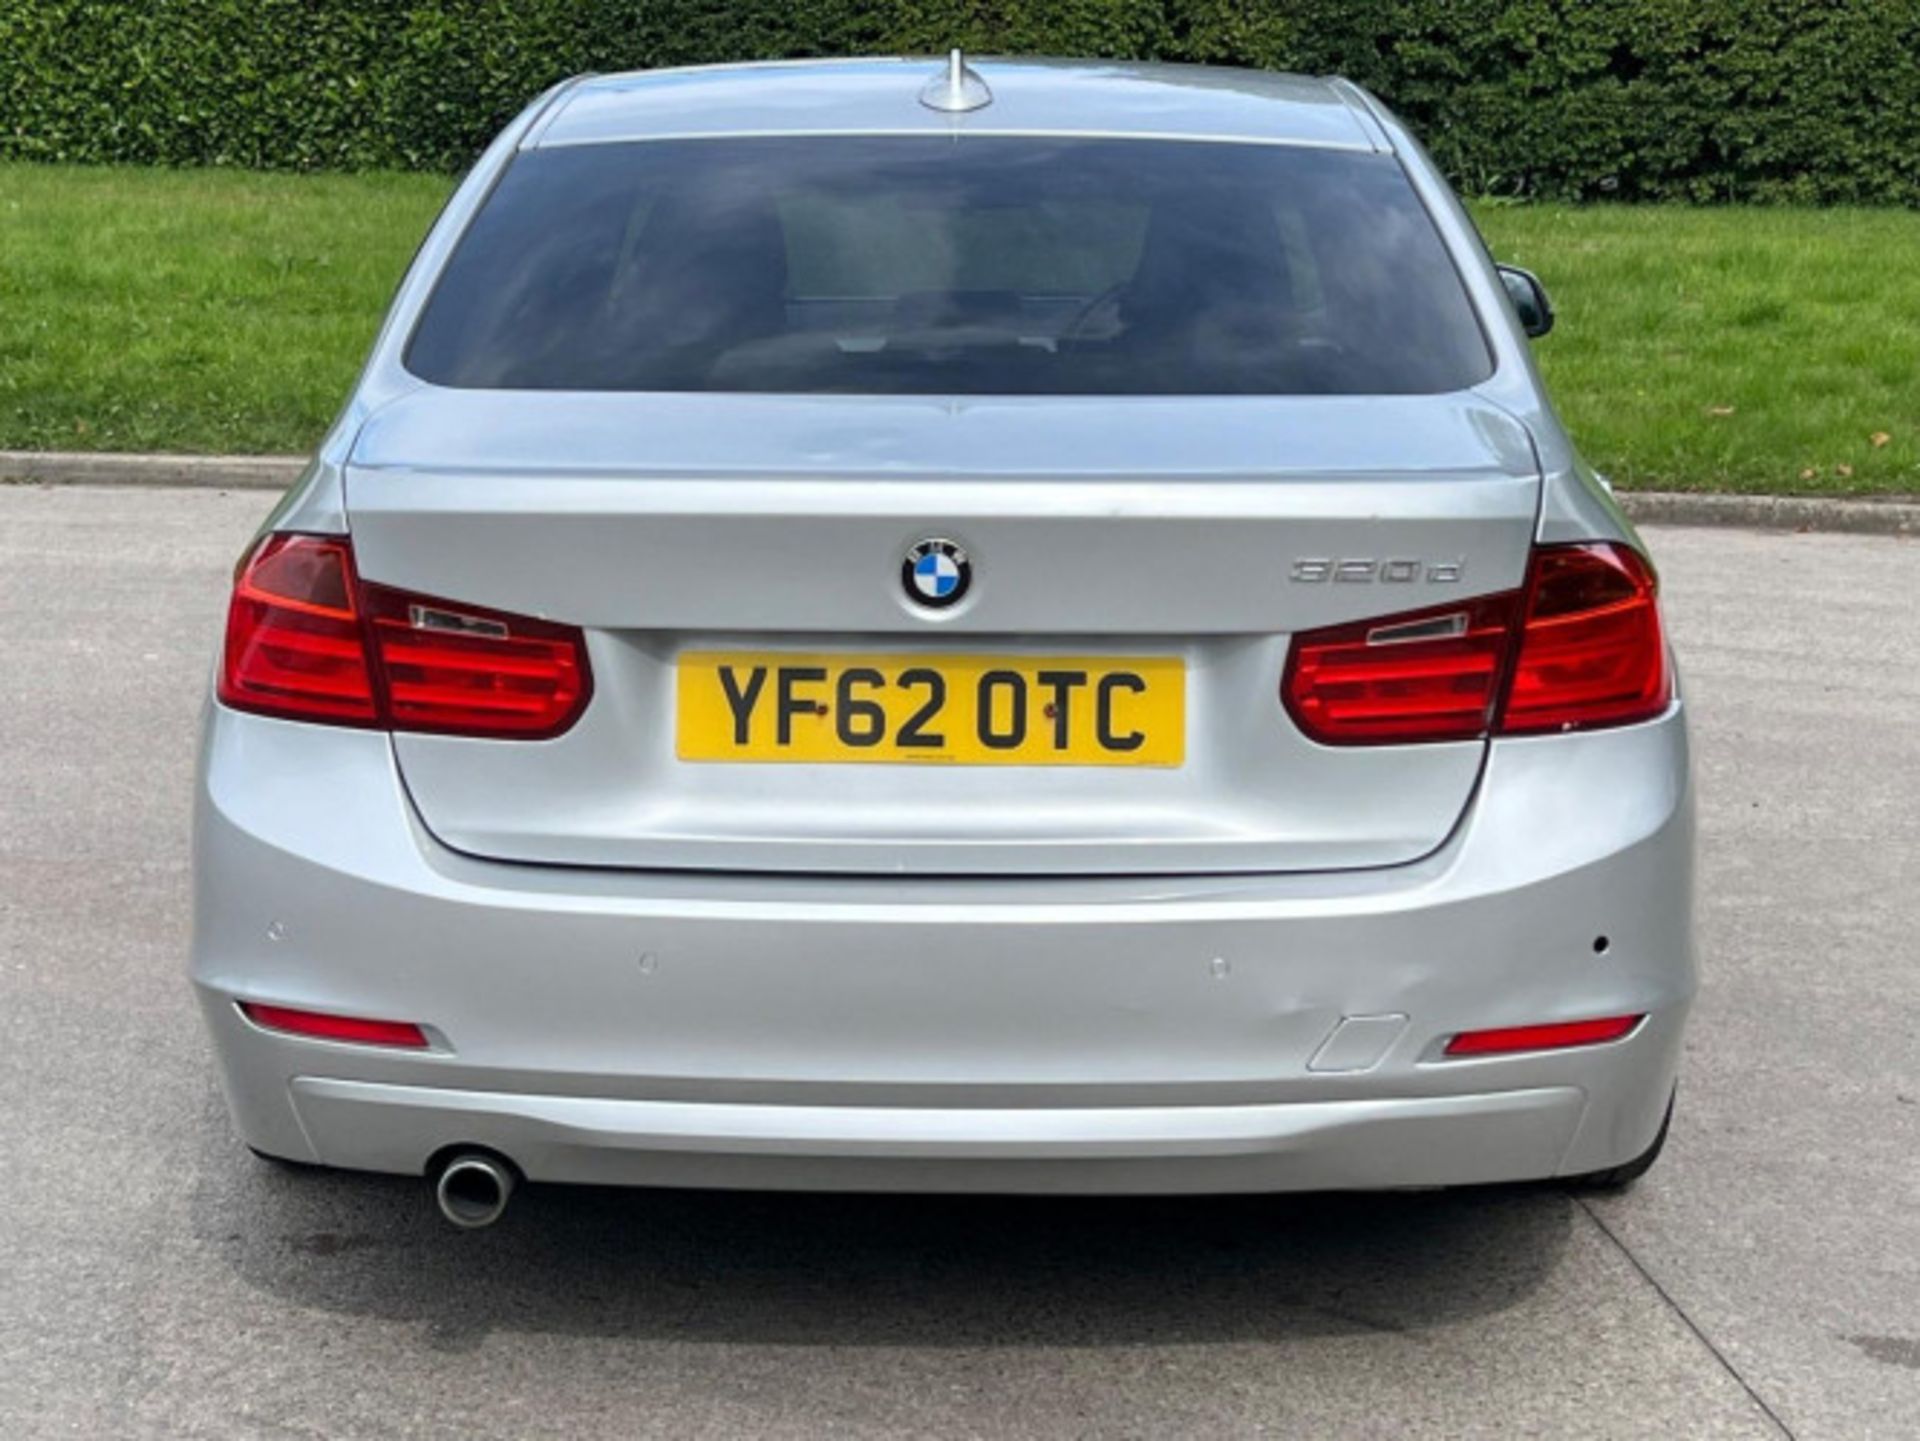 BMW 3 SERIES 2.0 DIESEL ED START STOP - A WELL-MAINTAINED GEM >>--NO VAT ON HAMMER--<< - Image 219 of 229